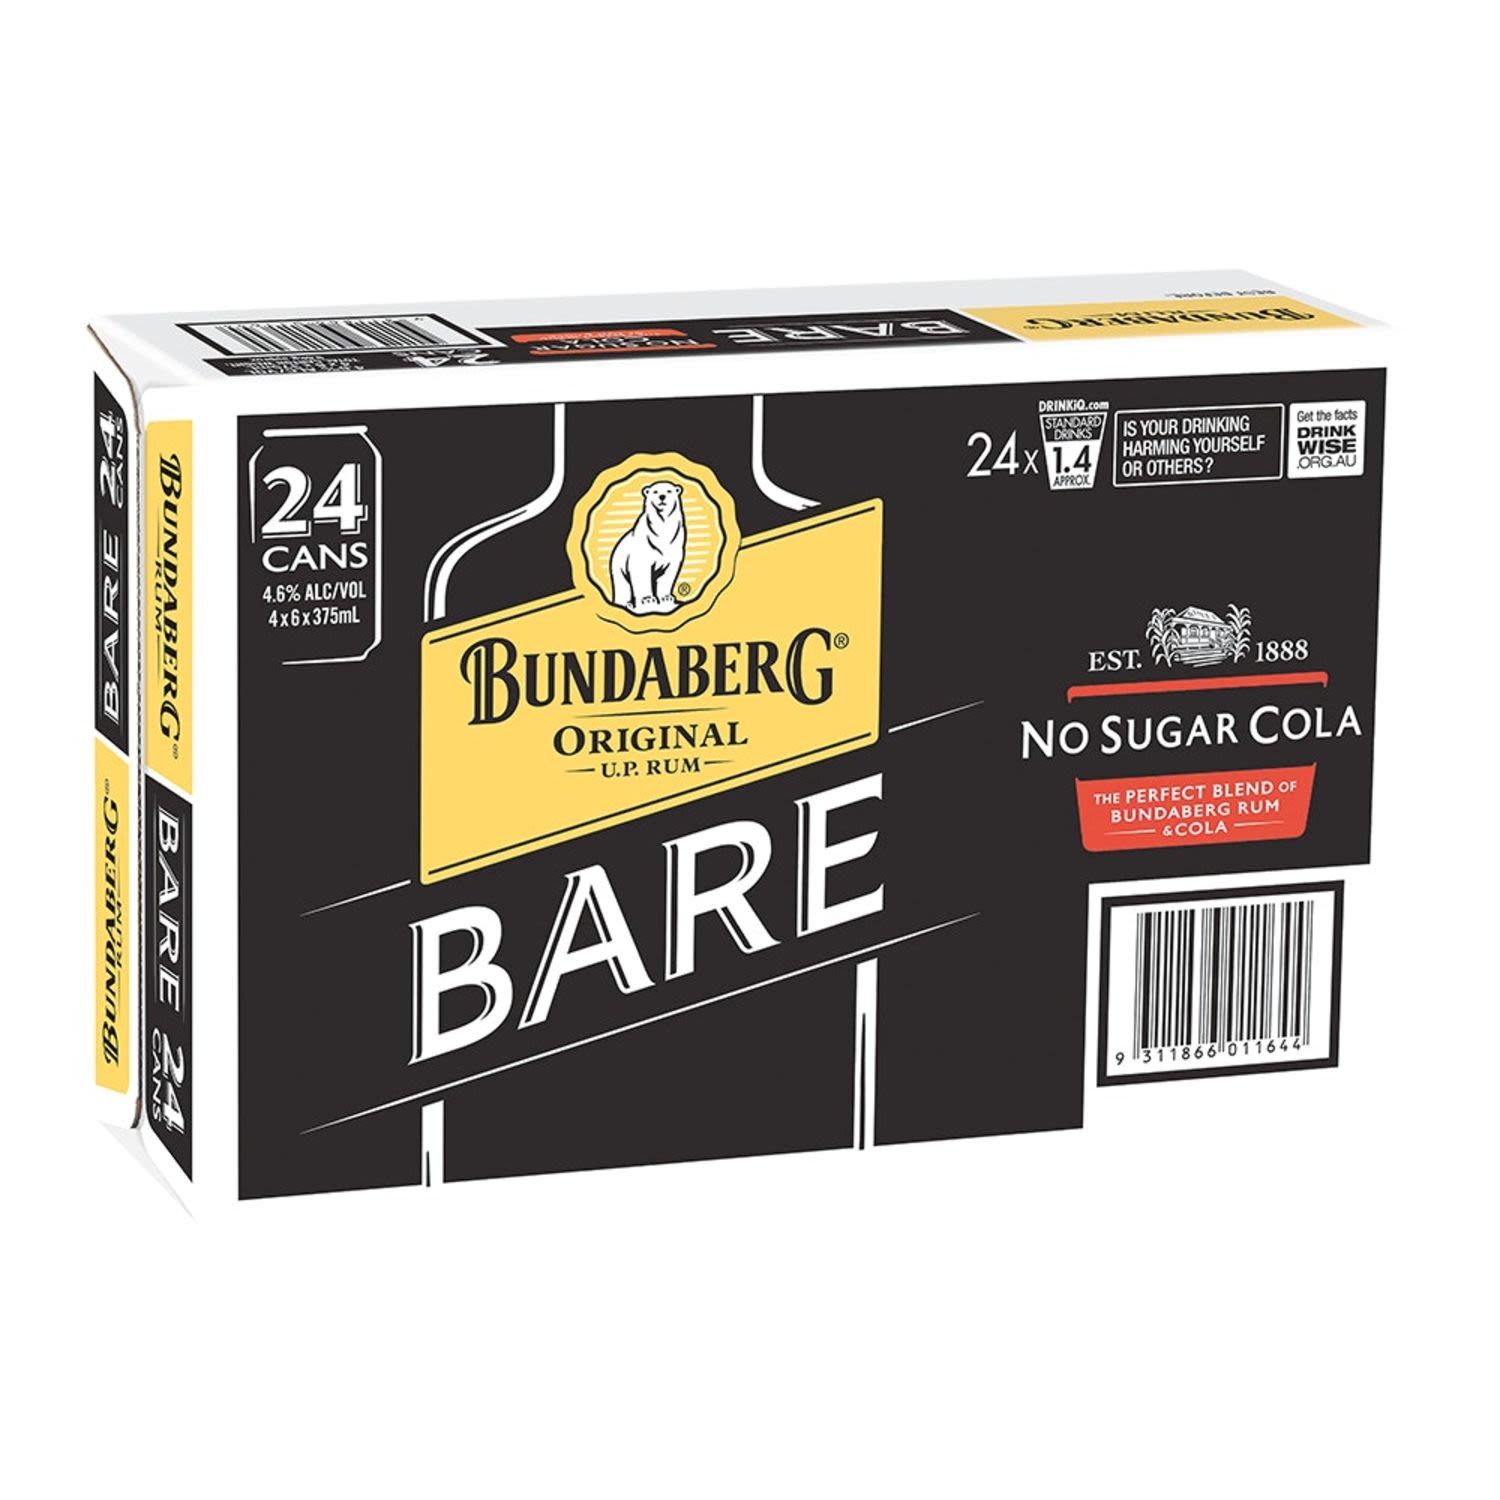 Sweetly scented with hints of oak, complimented by the sweetness of the cola<br /> <br />Alcohol Volume: 4.60%<br /><br />Pack Format: 24 Pack<br /><br />Standard Drinks: 1.4</br /><br />Pack Type: Can<br />